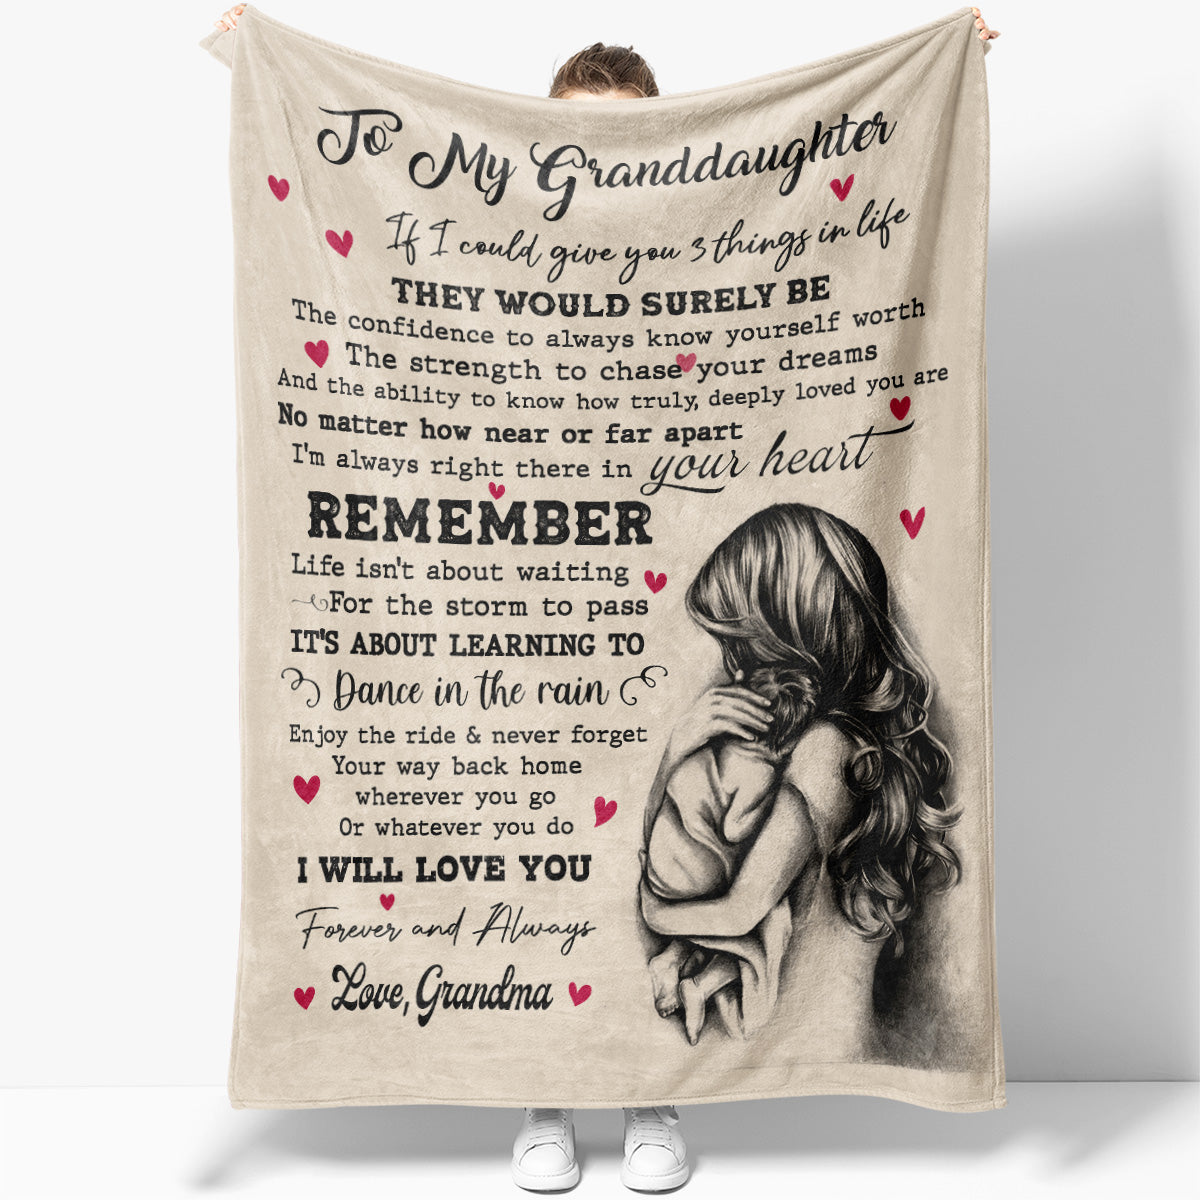 Give You Three Things Granddaughter Blanket, I'm Always Right There in Your Heart Blanket